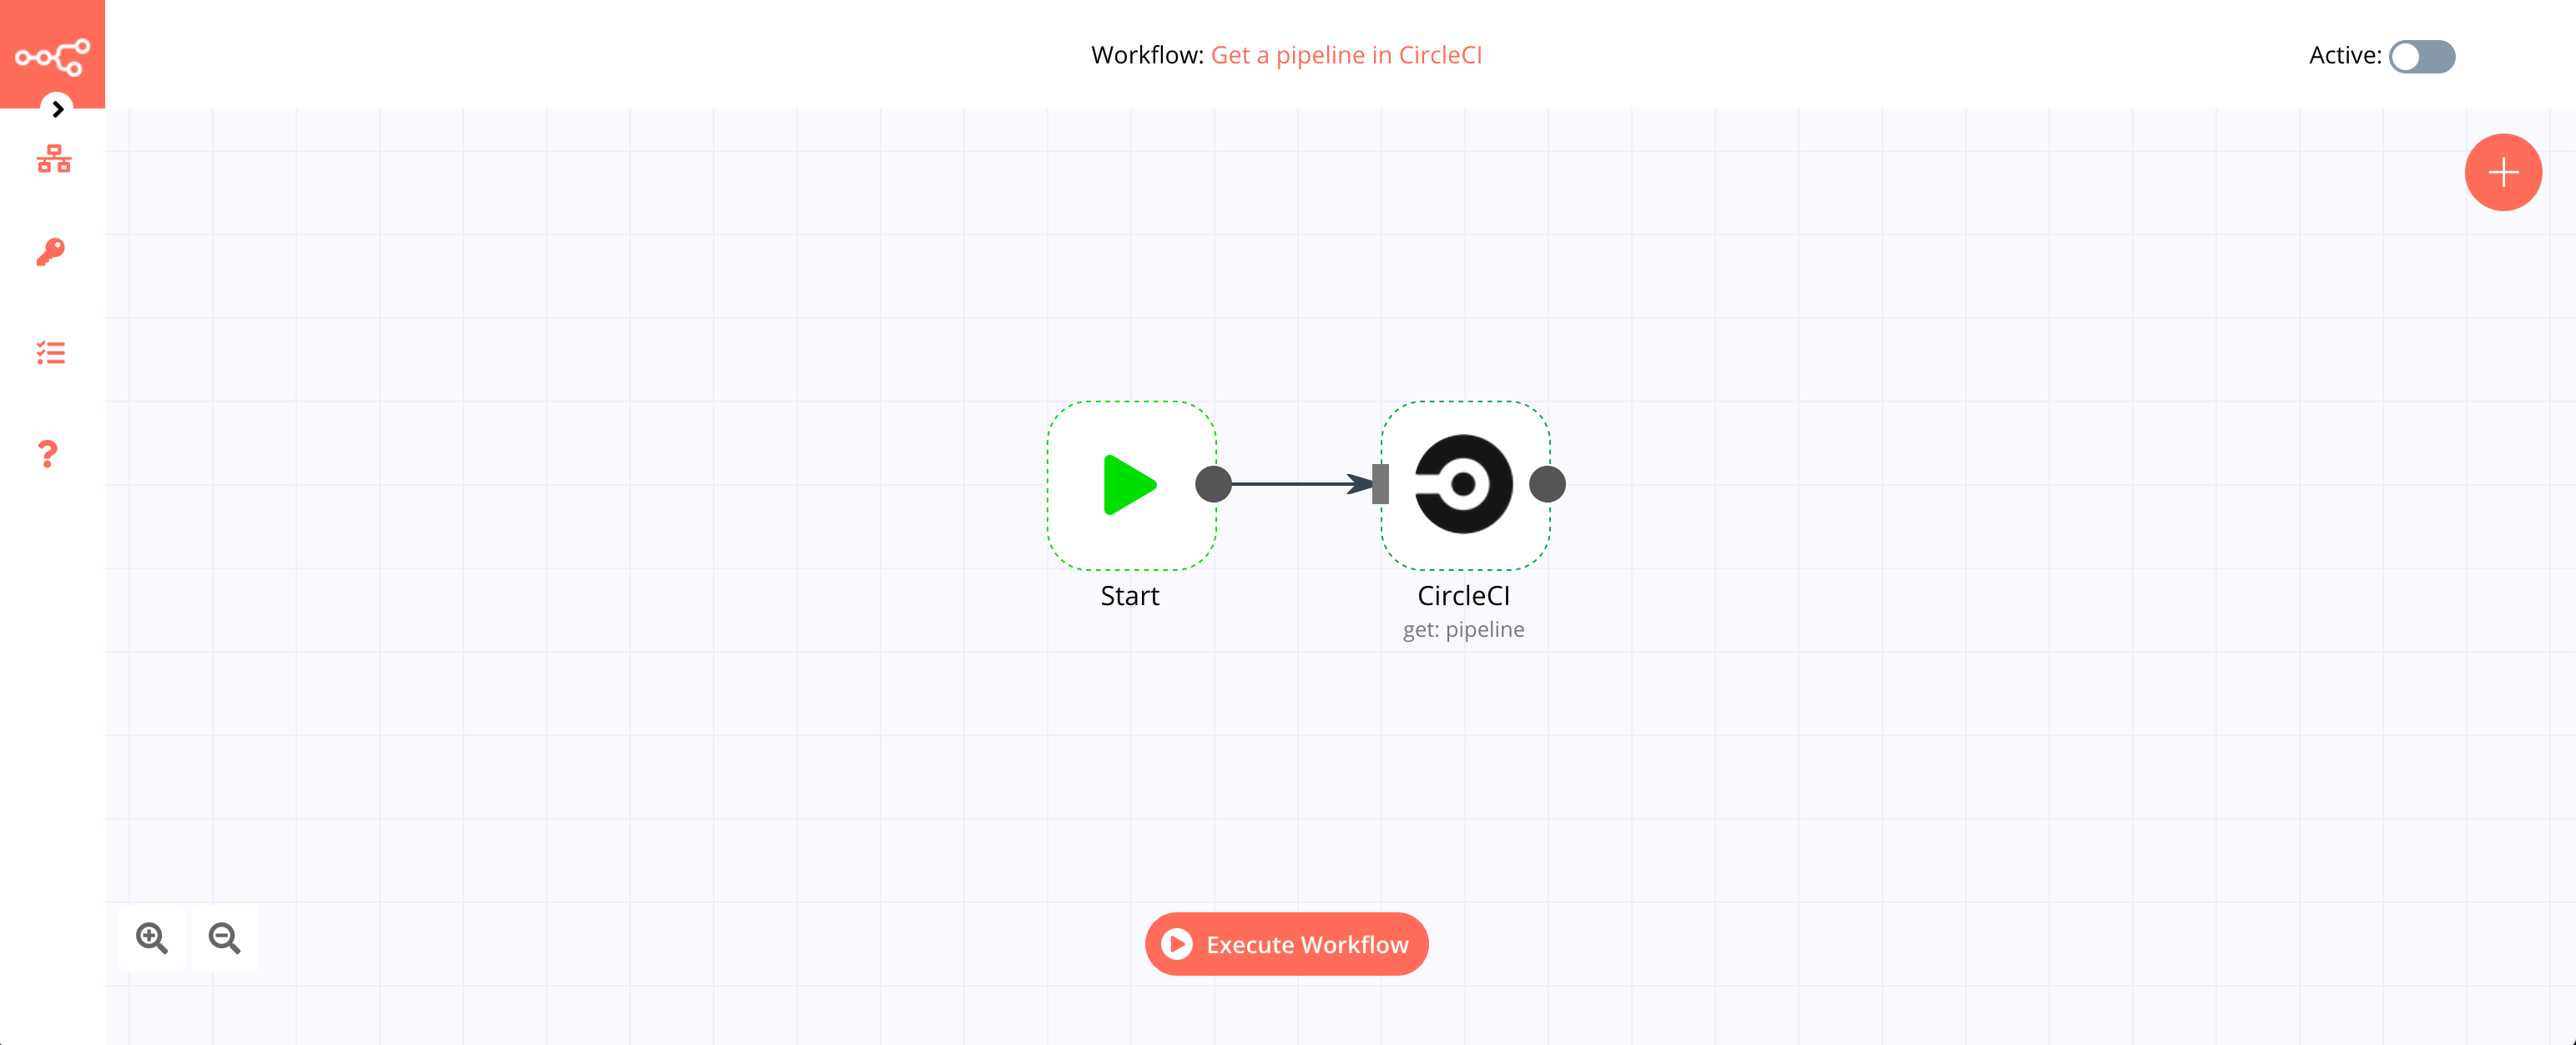 A workflow with the CircleCI node